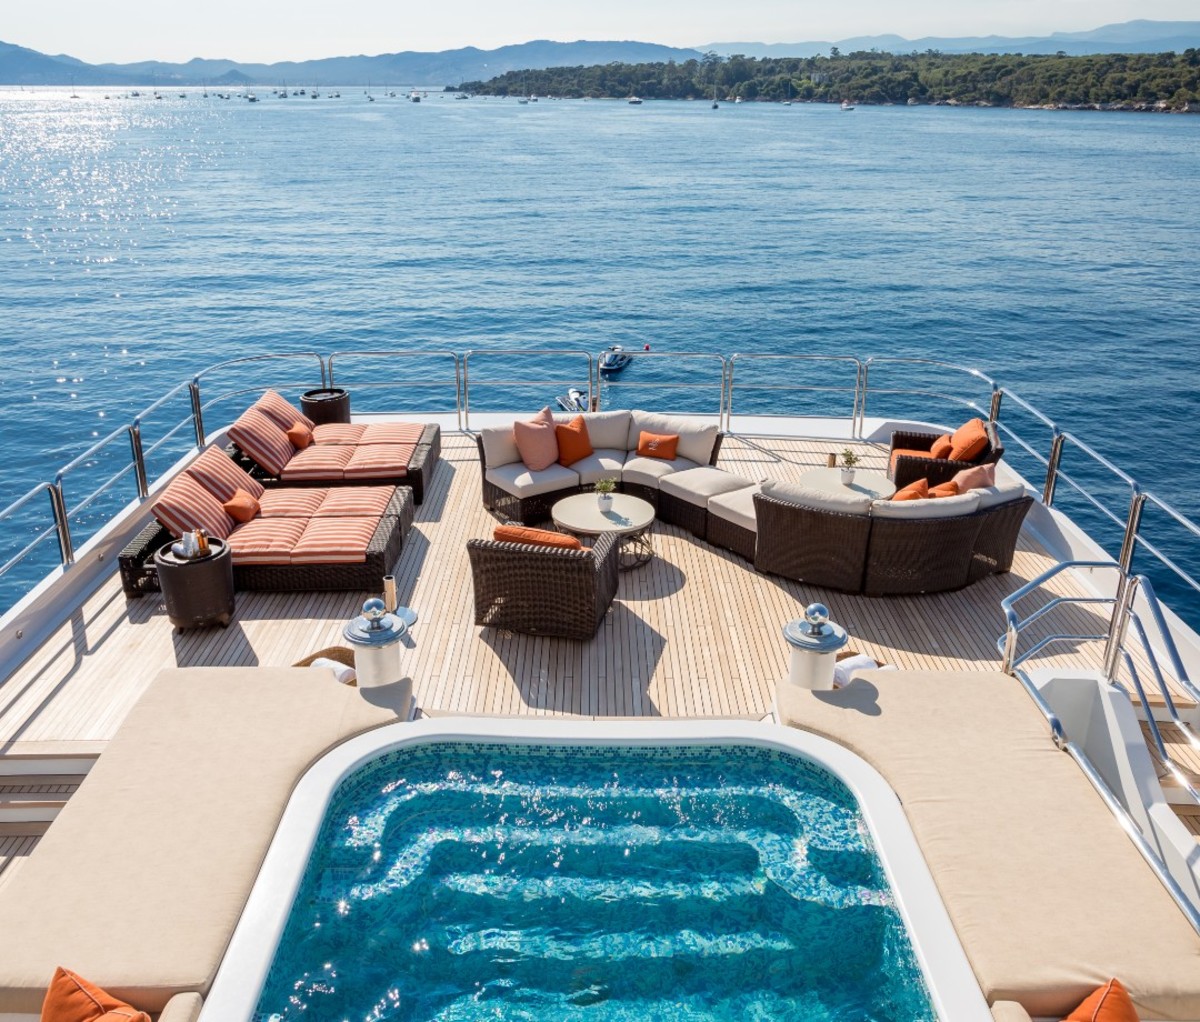 Yacht deck with hot tub and sun loungers